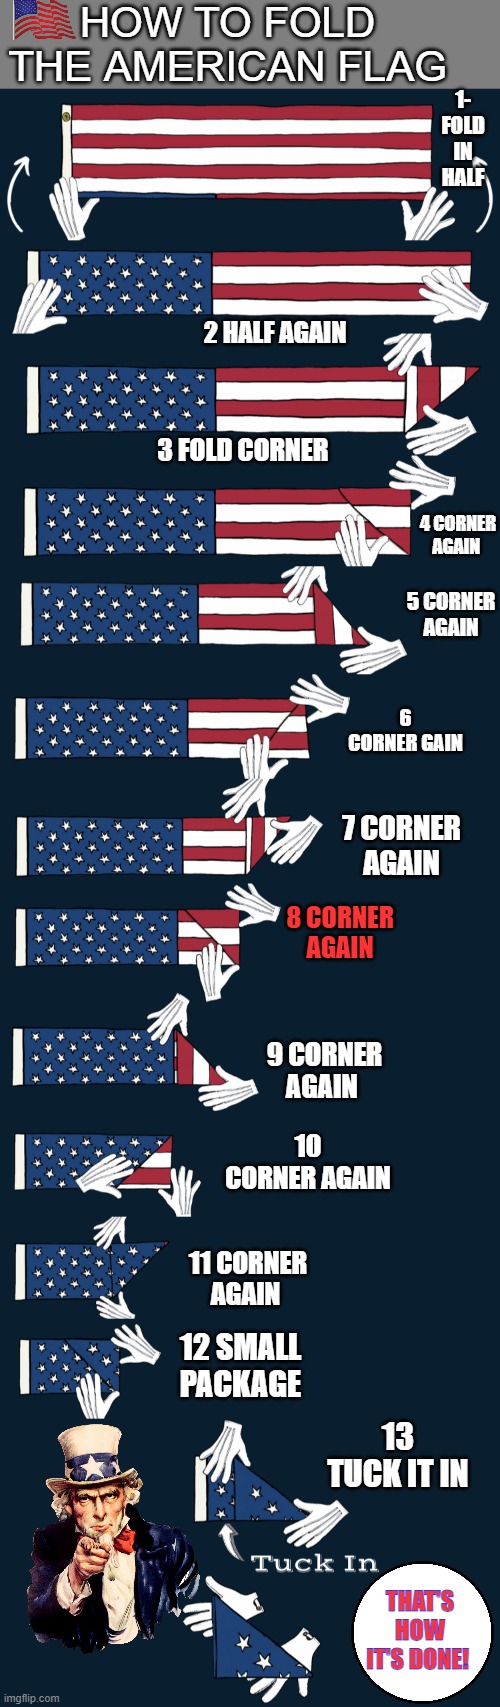 13 folds of the Americna Flag | HOW TO FOLD THE AMERICAN FLAG; 1- FOLD IN HALF; 2 HALF AGAIN; 3 FOLD CORNER; 4 CORNER AGAIN; 5 CORNER AGAIN; 6 CORNER GAIN; 7 CORNER AGAIN; 8 CORNER AGAIN; 9 CORNER AGAIN; 10 CORNER AGAIN; 11 CORNER AGAIN; 12 SMALL PACKAGE; 13 TUCK IT IN; THAT'S HOW IT'S DONE! | image tagged in blank grey | made w/ Imgflip meme maker